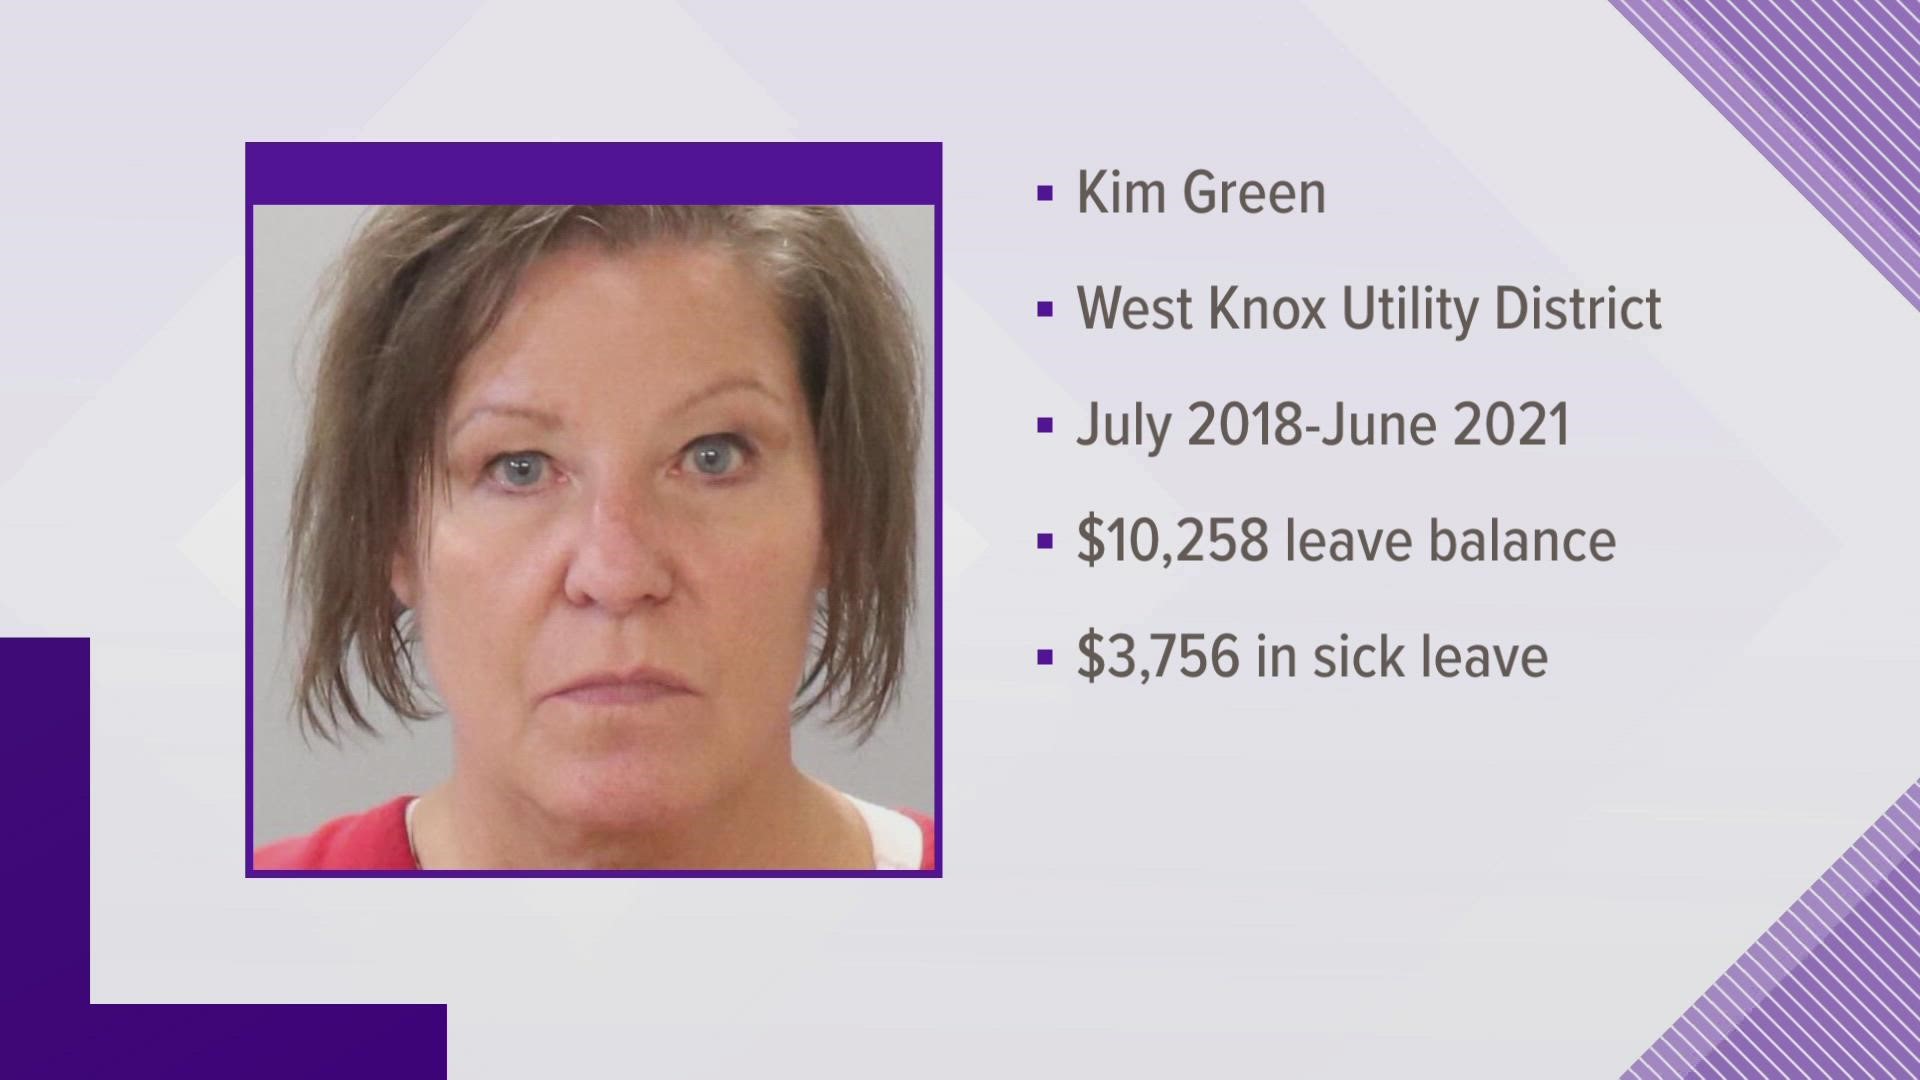 The balances of Kim Green's paid time off and sick leave were changed to increase the value to a total of more than $14,000, according to state authorities.